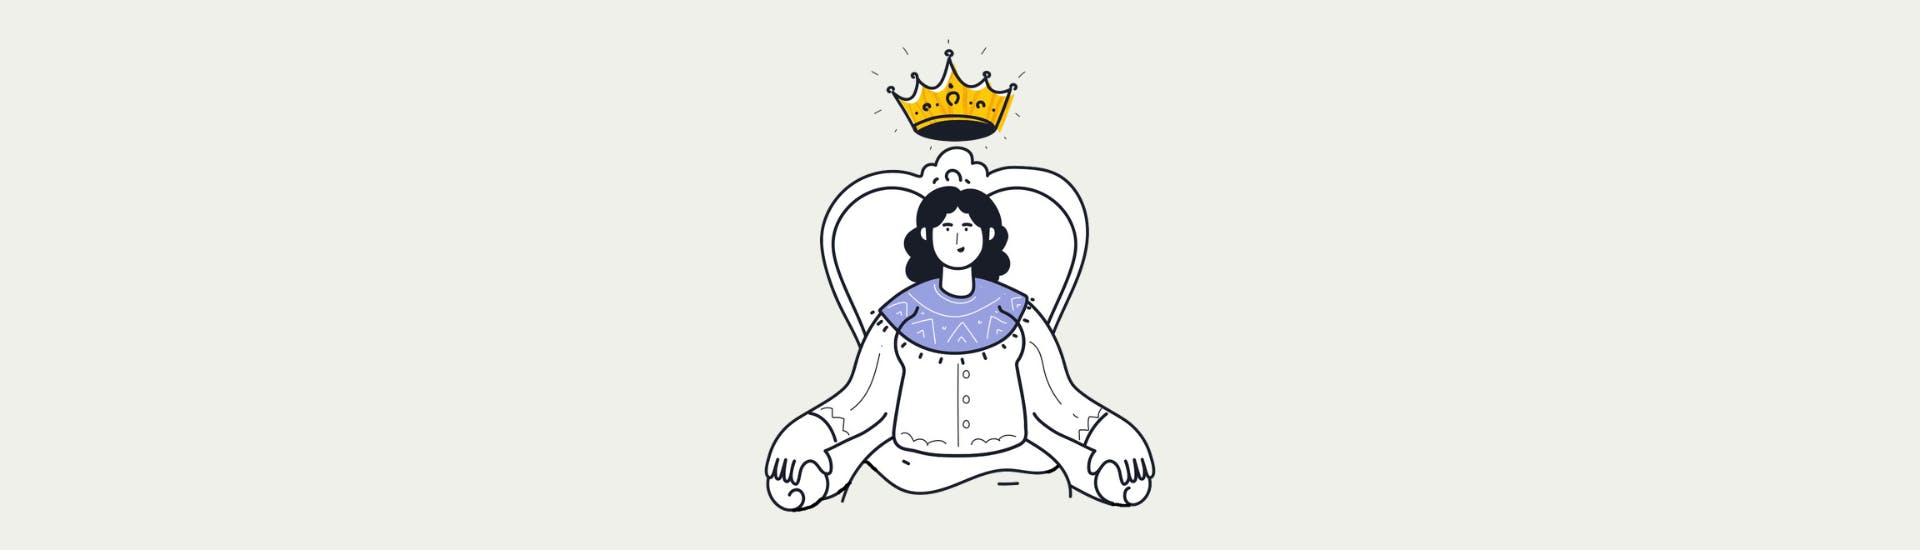 Illustration, woman sits on a throne, above her head floats a crown.